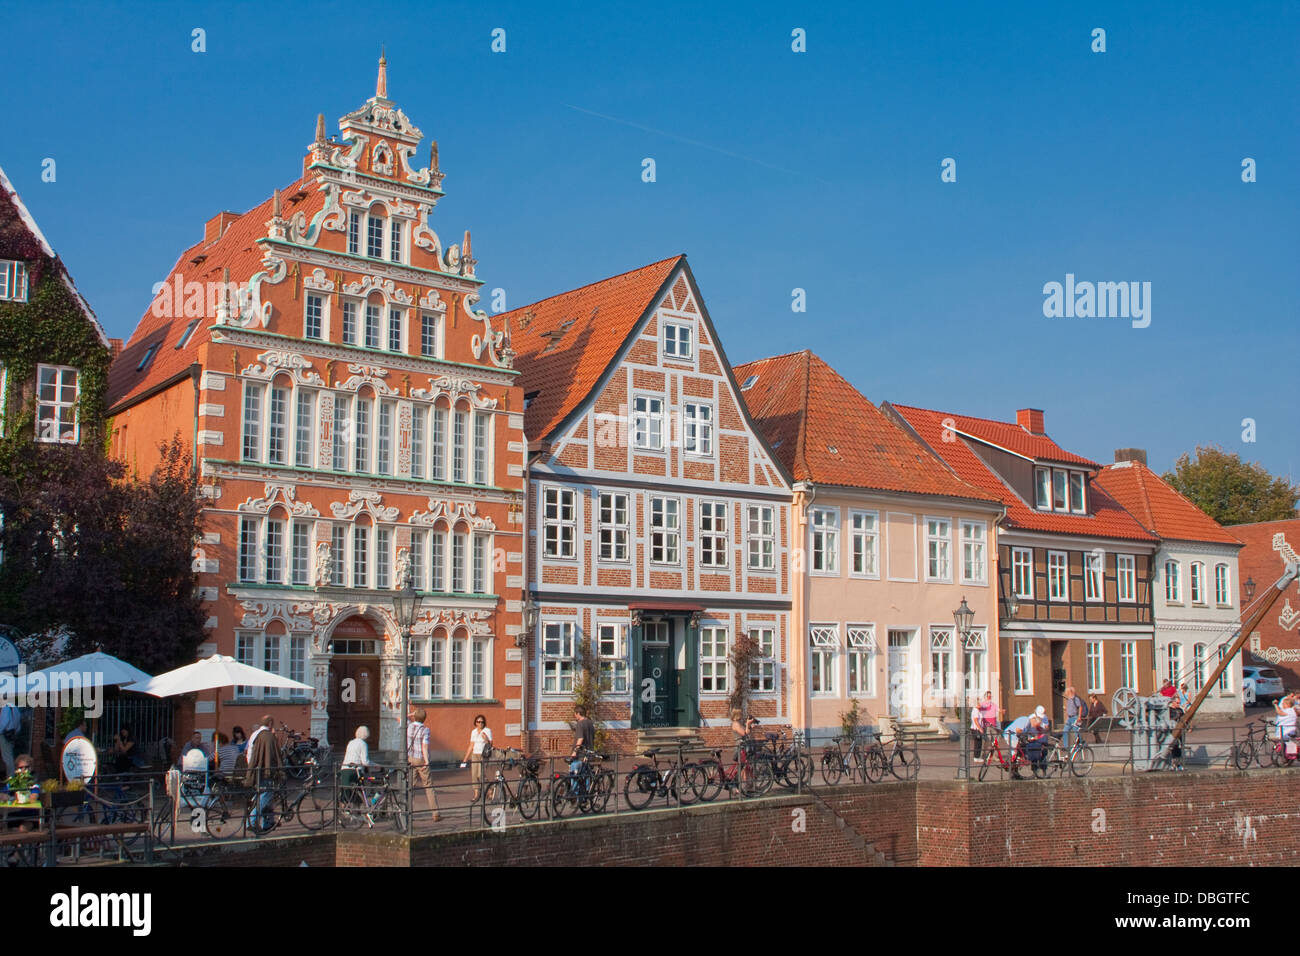 Europe, Germany, Lower Saxony, Stade, old town Stock Photo